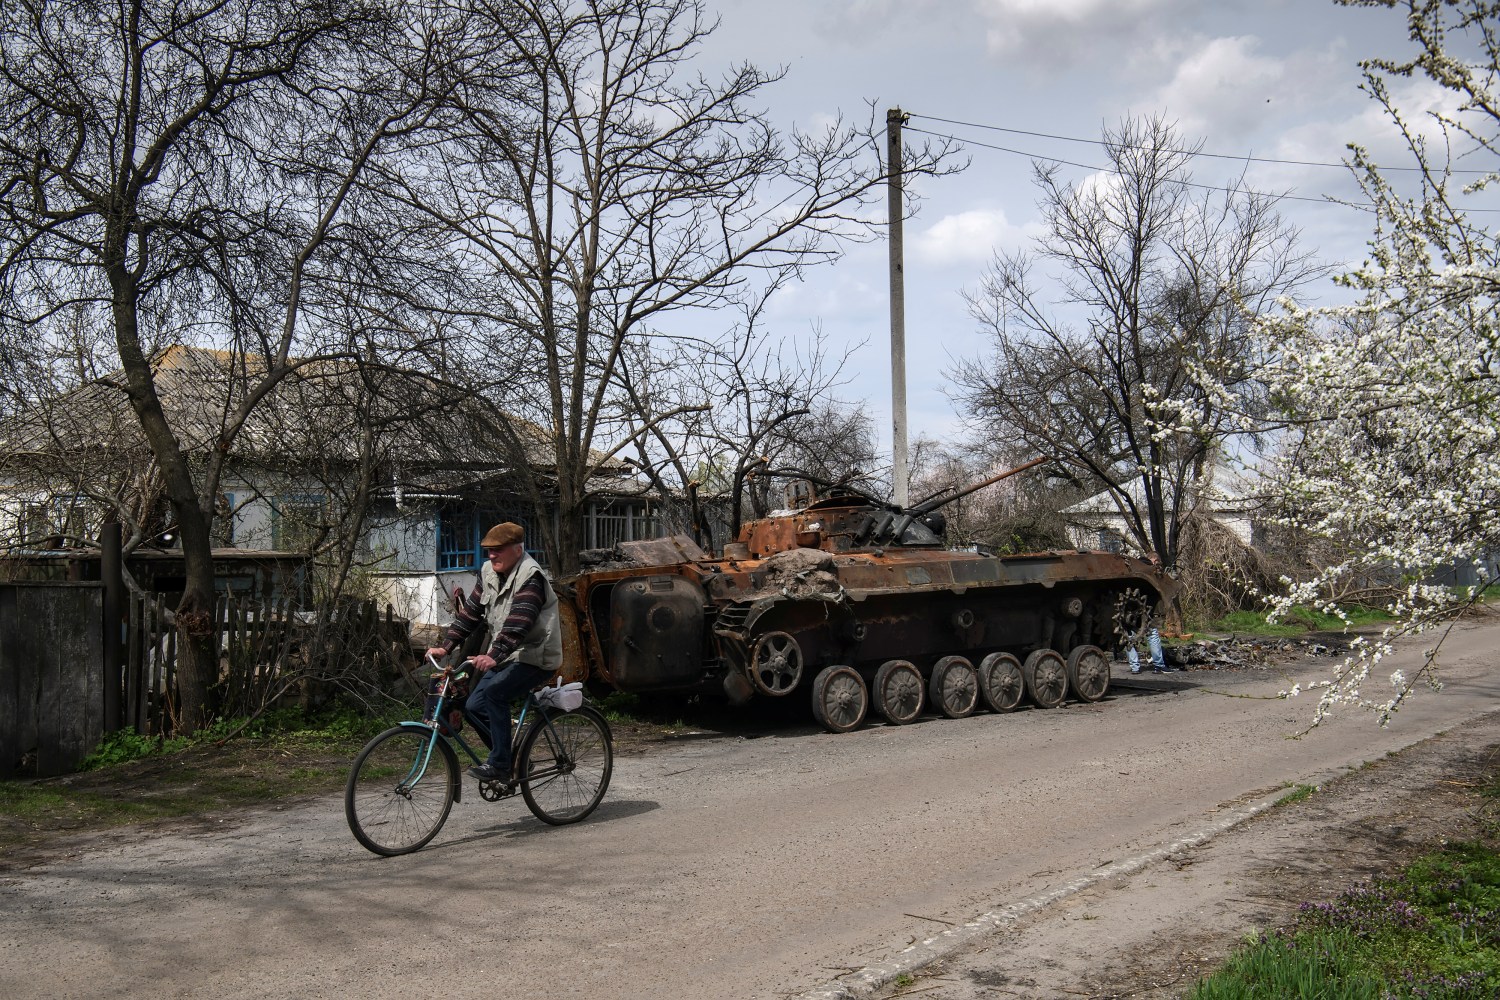 A man rides a bicycle past the debris of Russian military machinery destroyed during Russia's invasion of Ukraine, in the village of Rusaniv, Kyiv region, Ukraine April 25, 2022. REUTERS/Vladyslav Musiienko